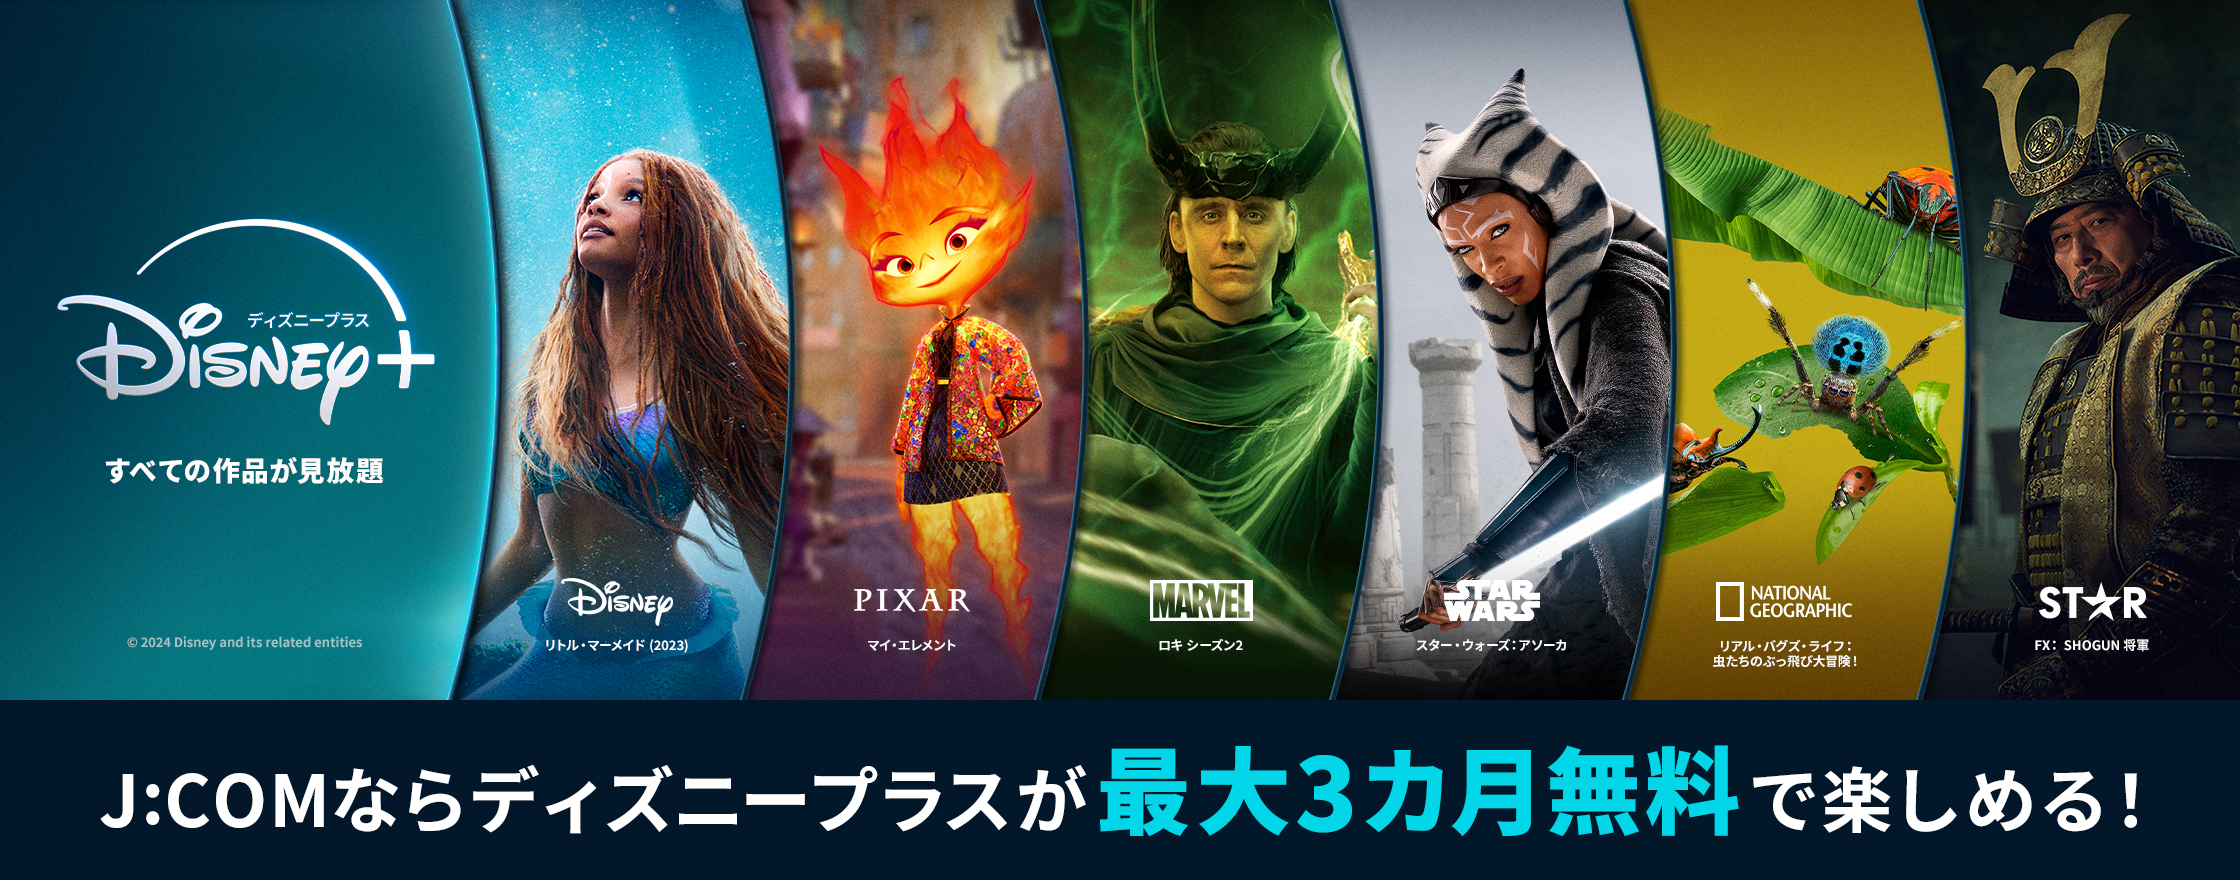 With J:COM, you can enjoy Disney Plus for free for up to 3 months!